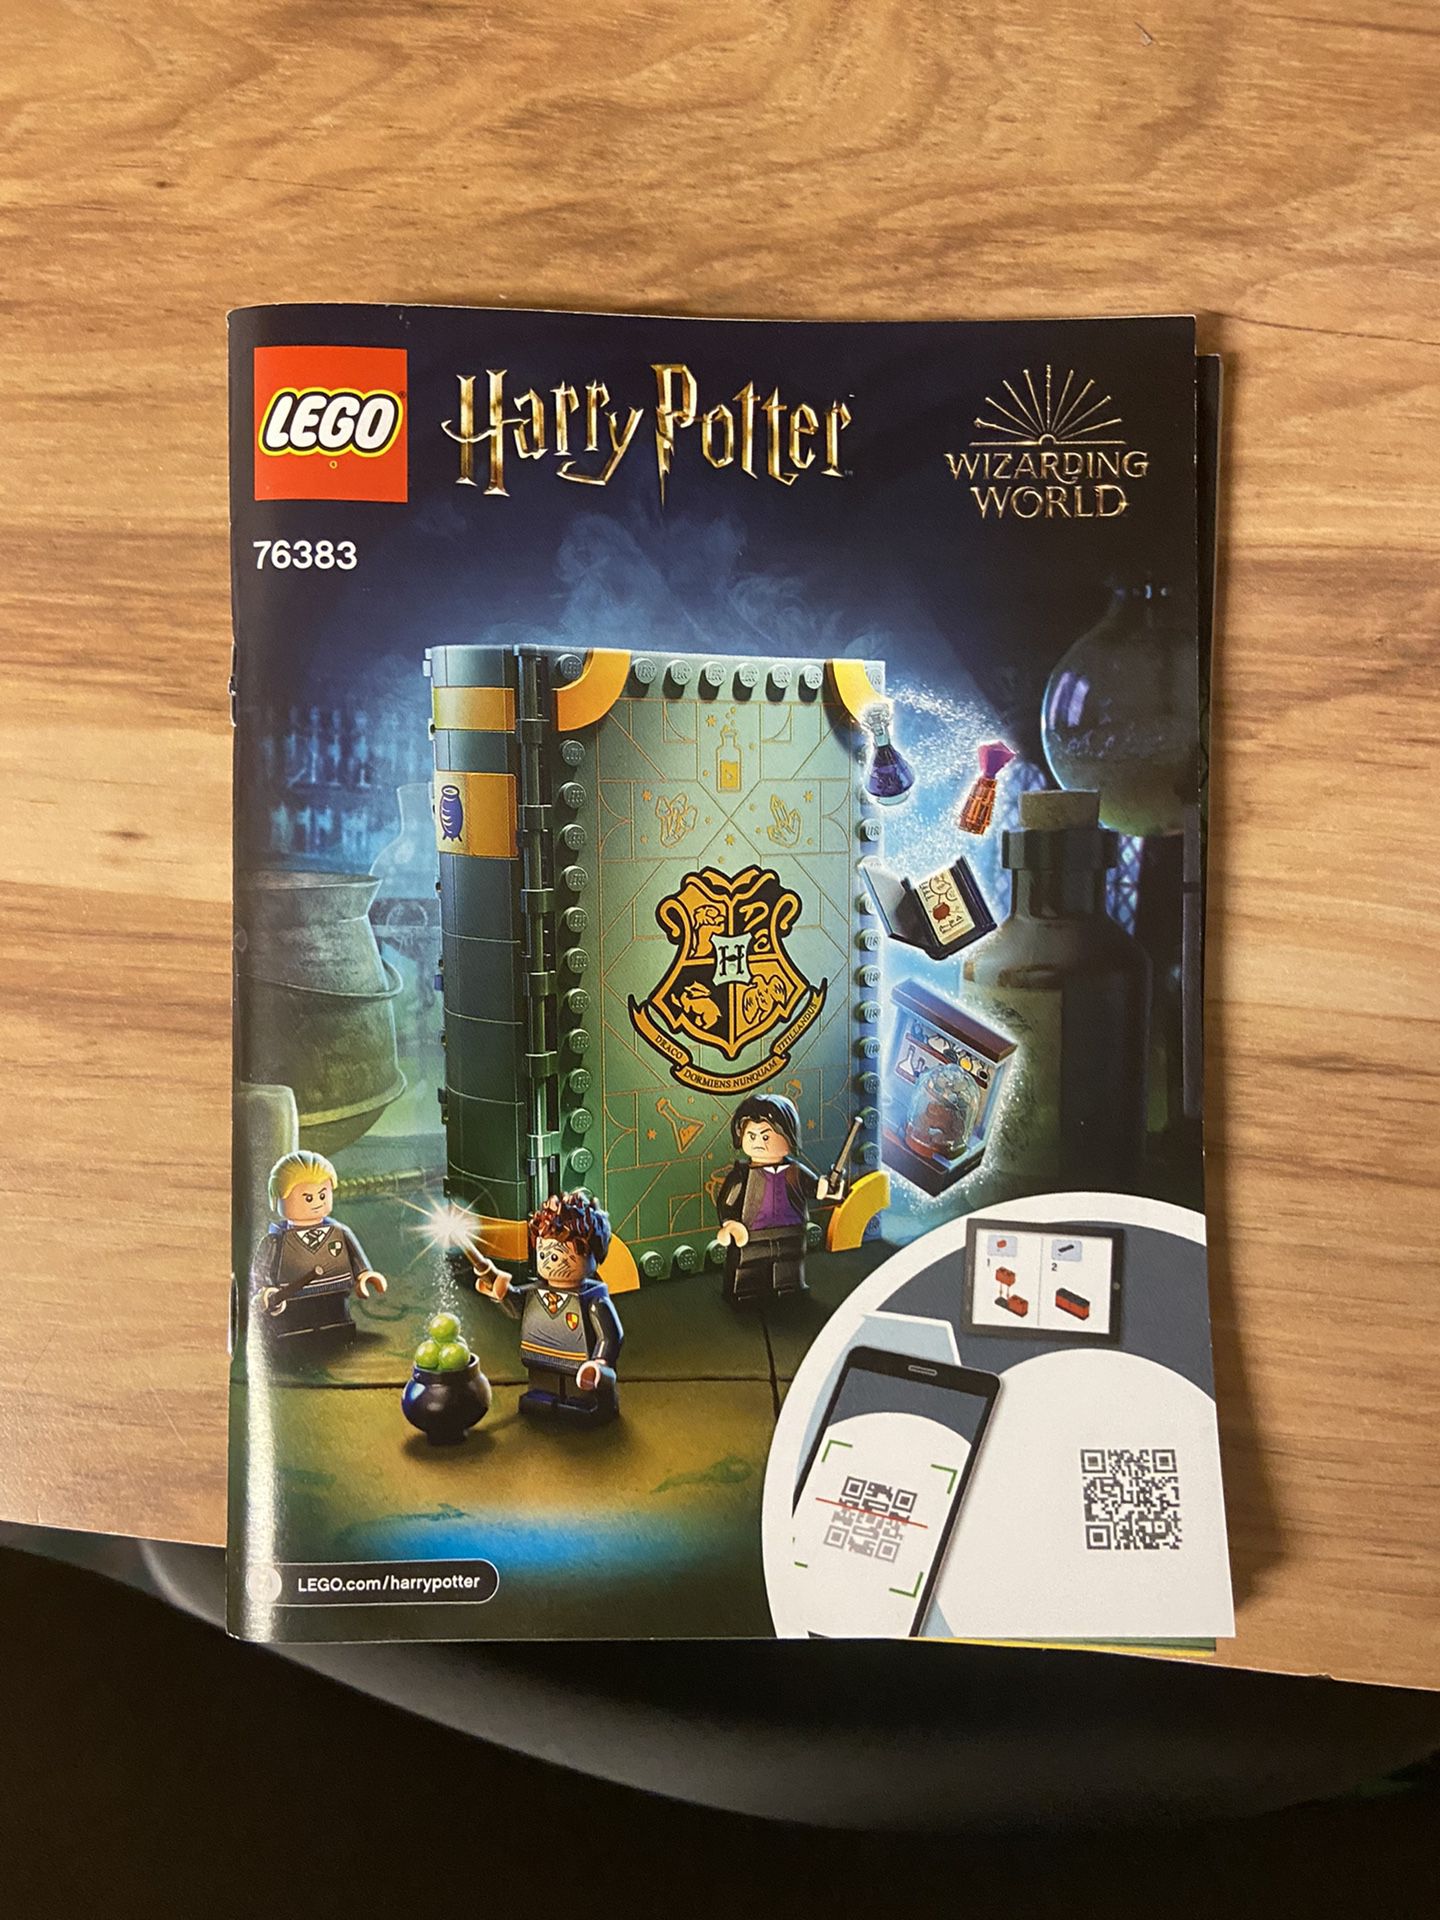 Harry Potter Legos- Potions Class Book (slytherin)